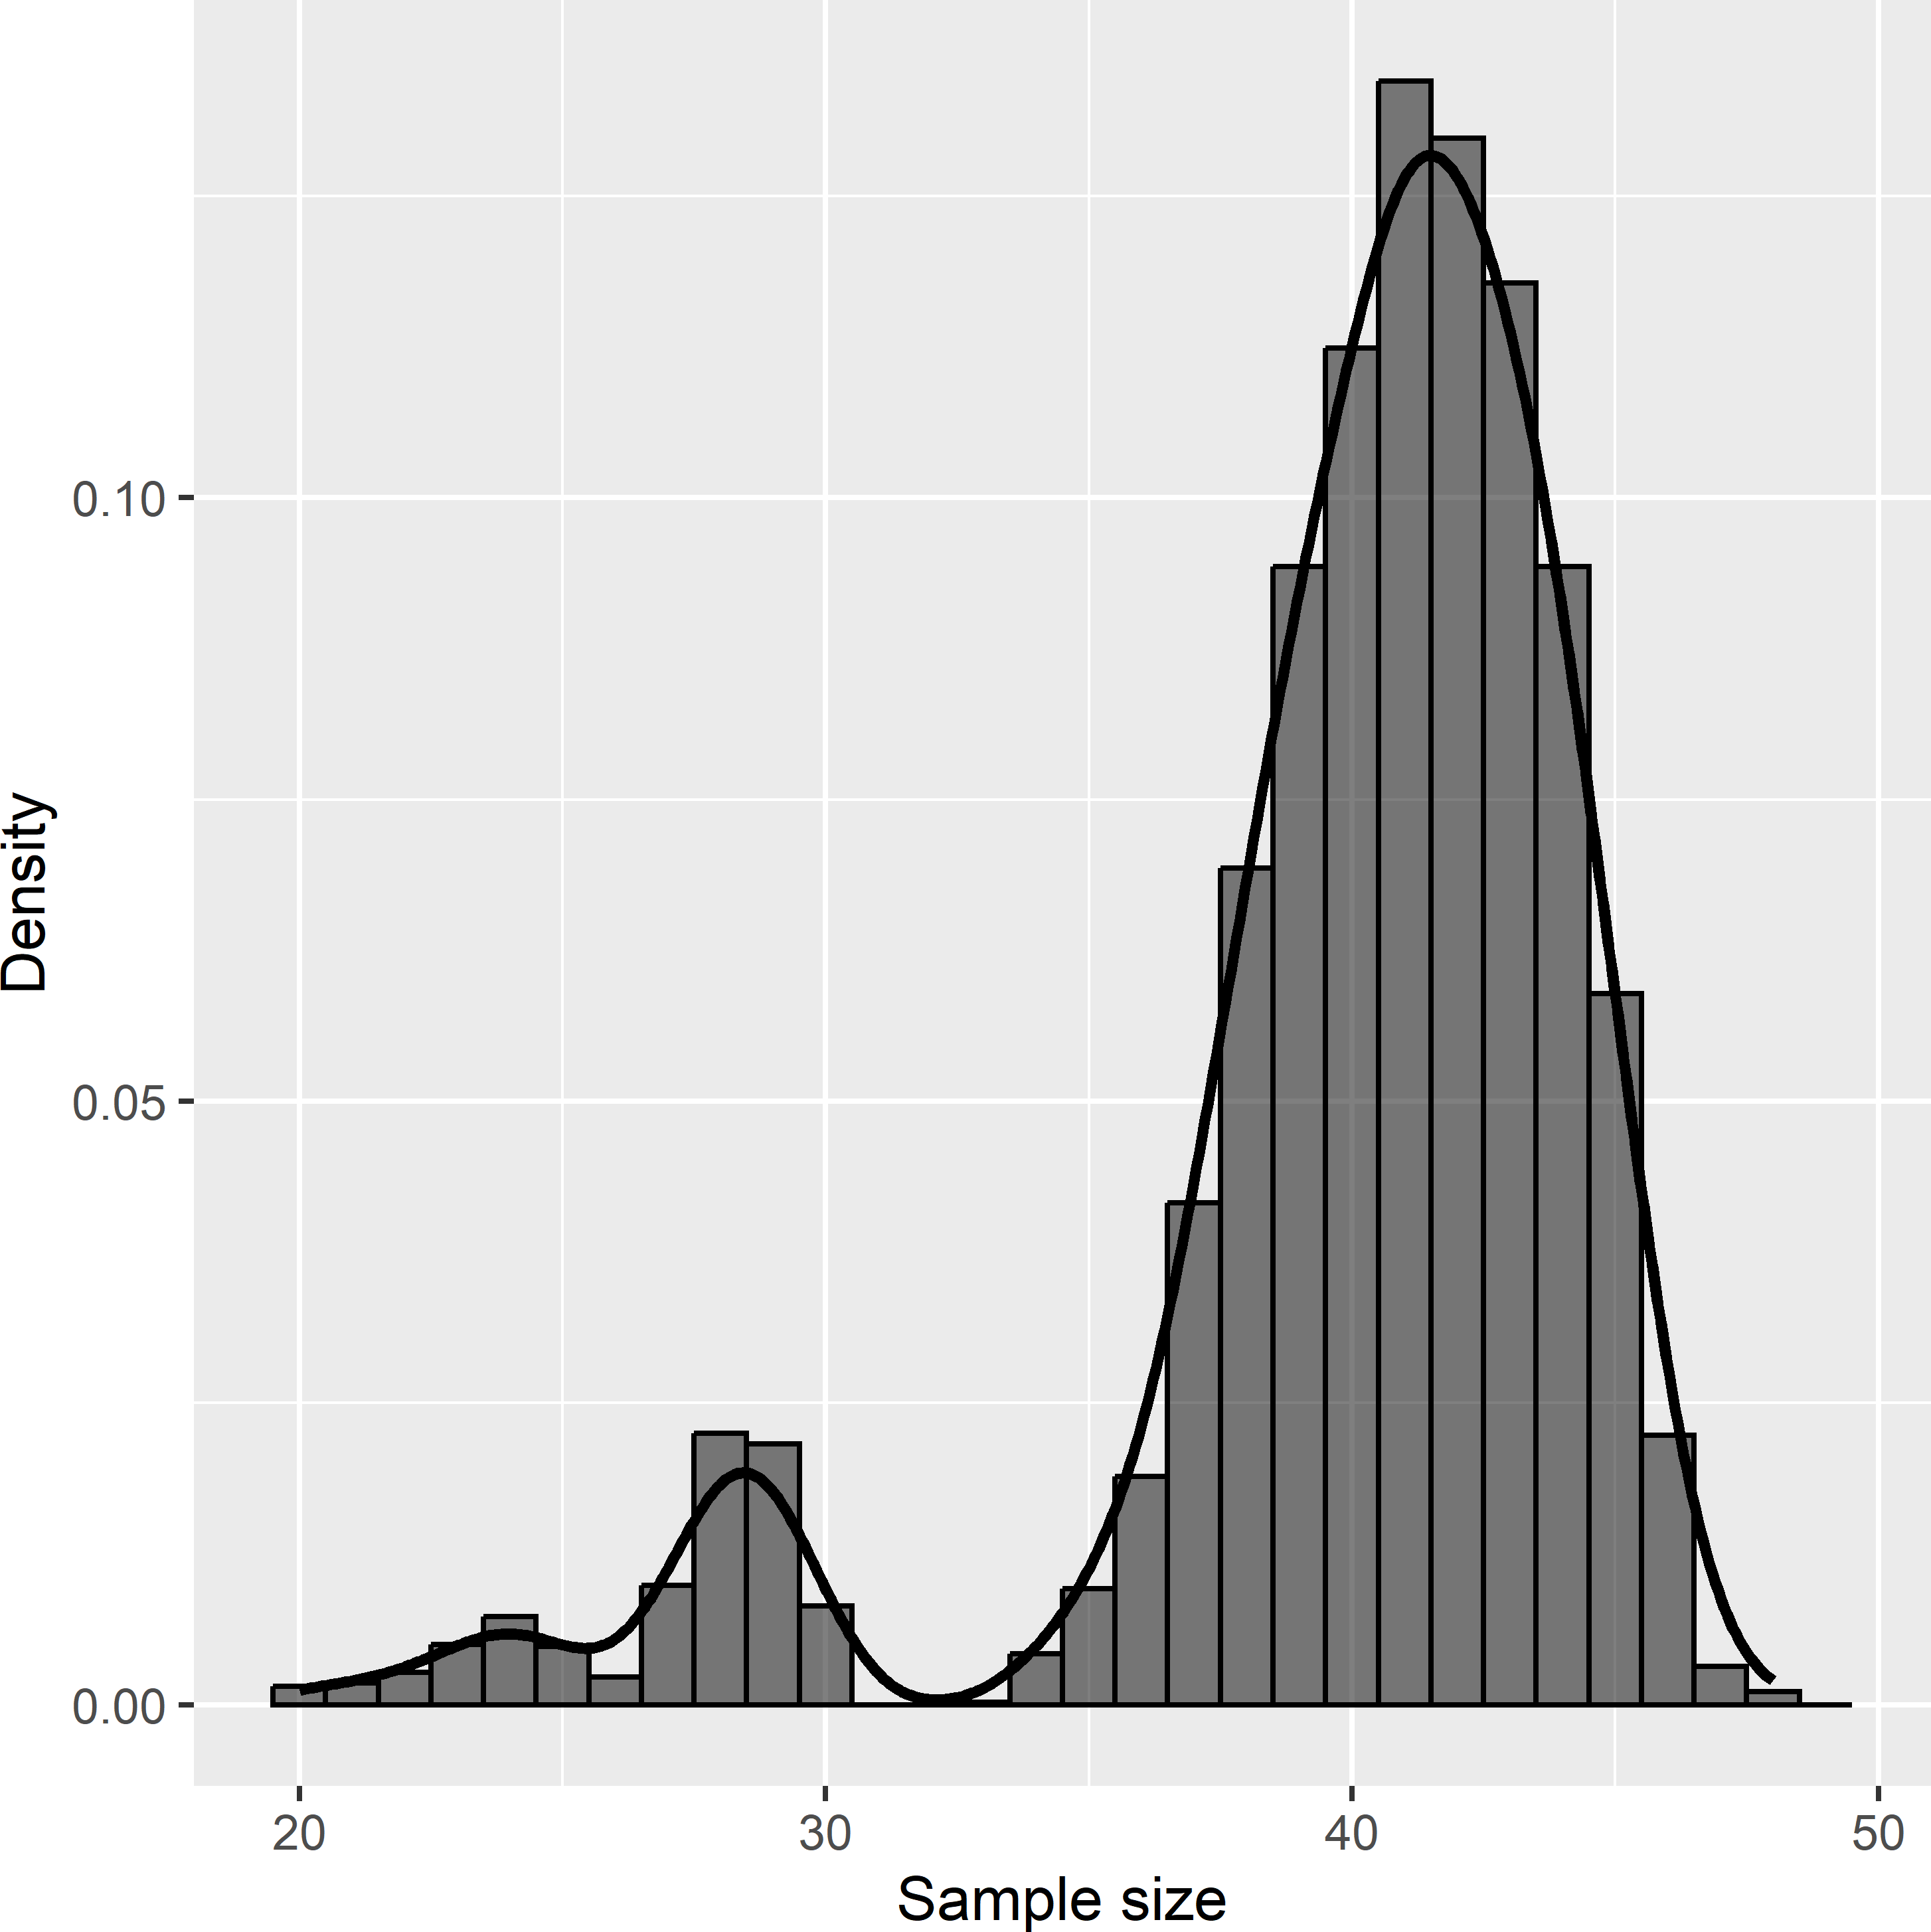 Approximated sampling distribution of the sample size of systematic random samples from Voorst. The expected sample size is 40.